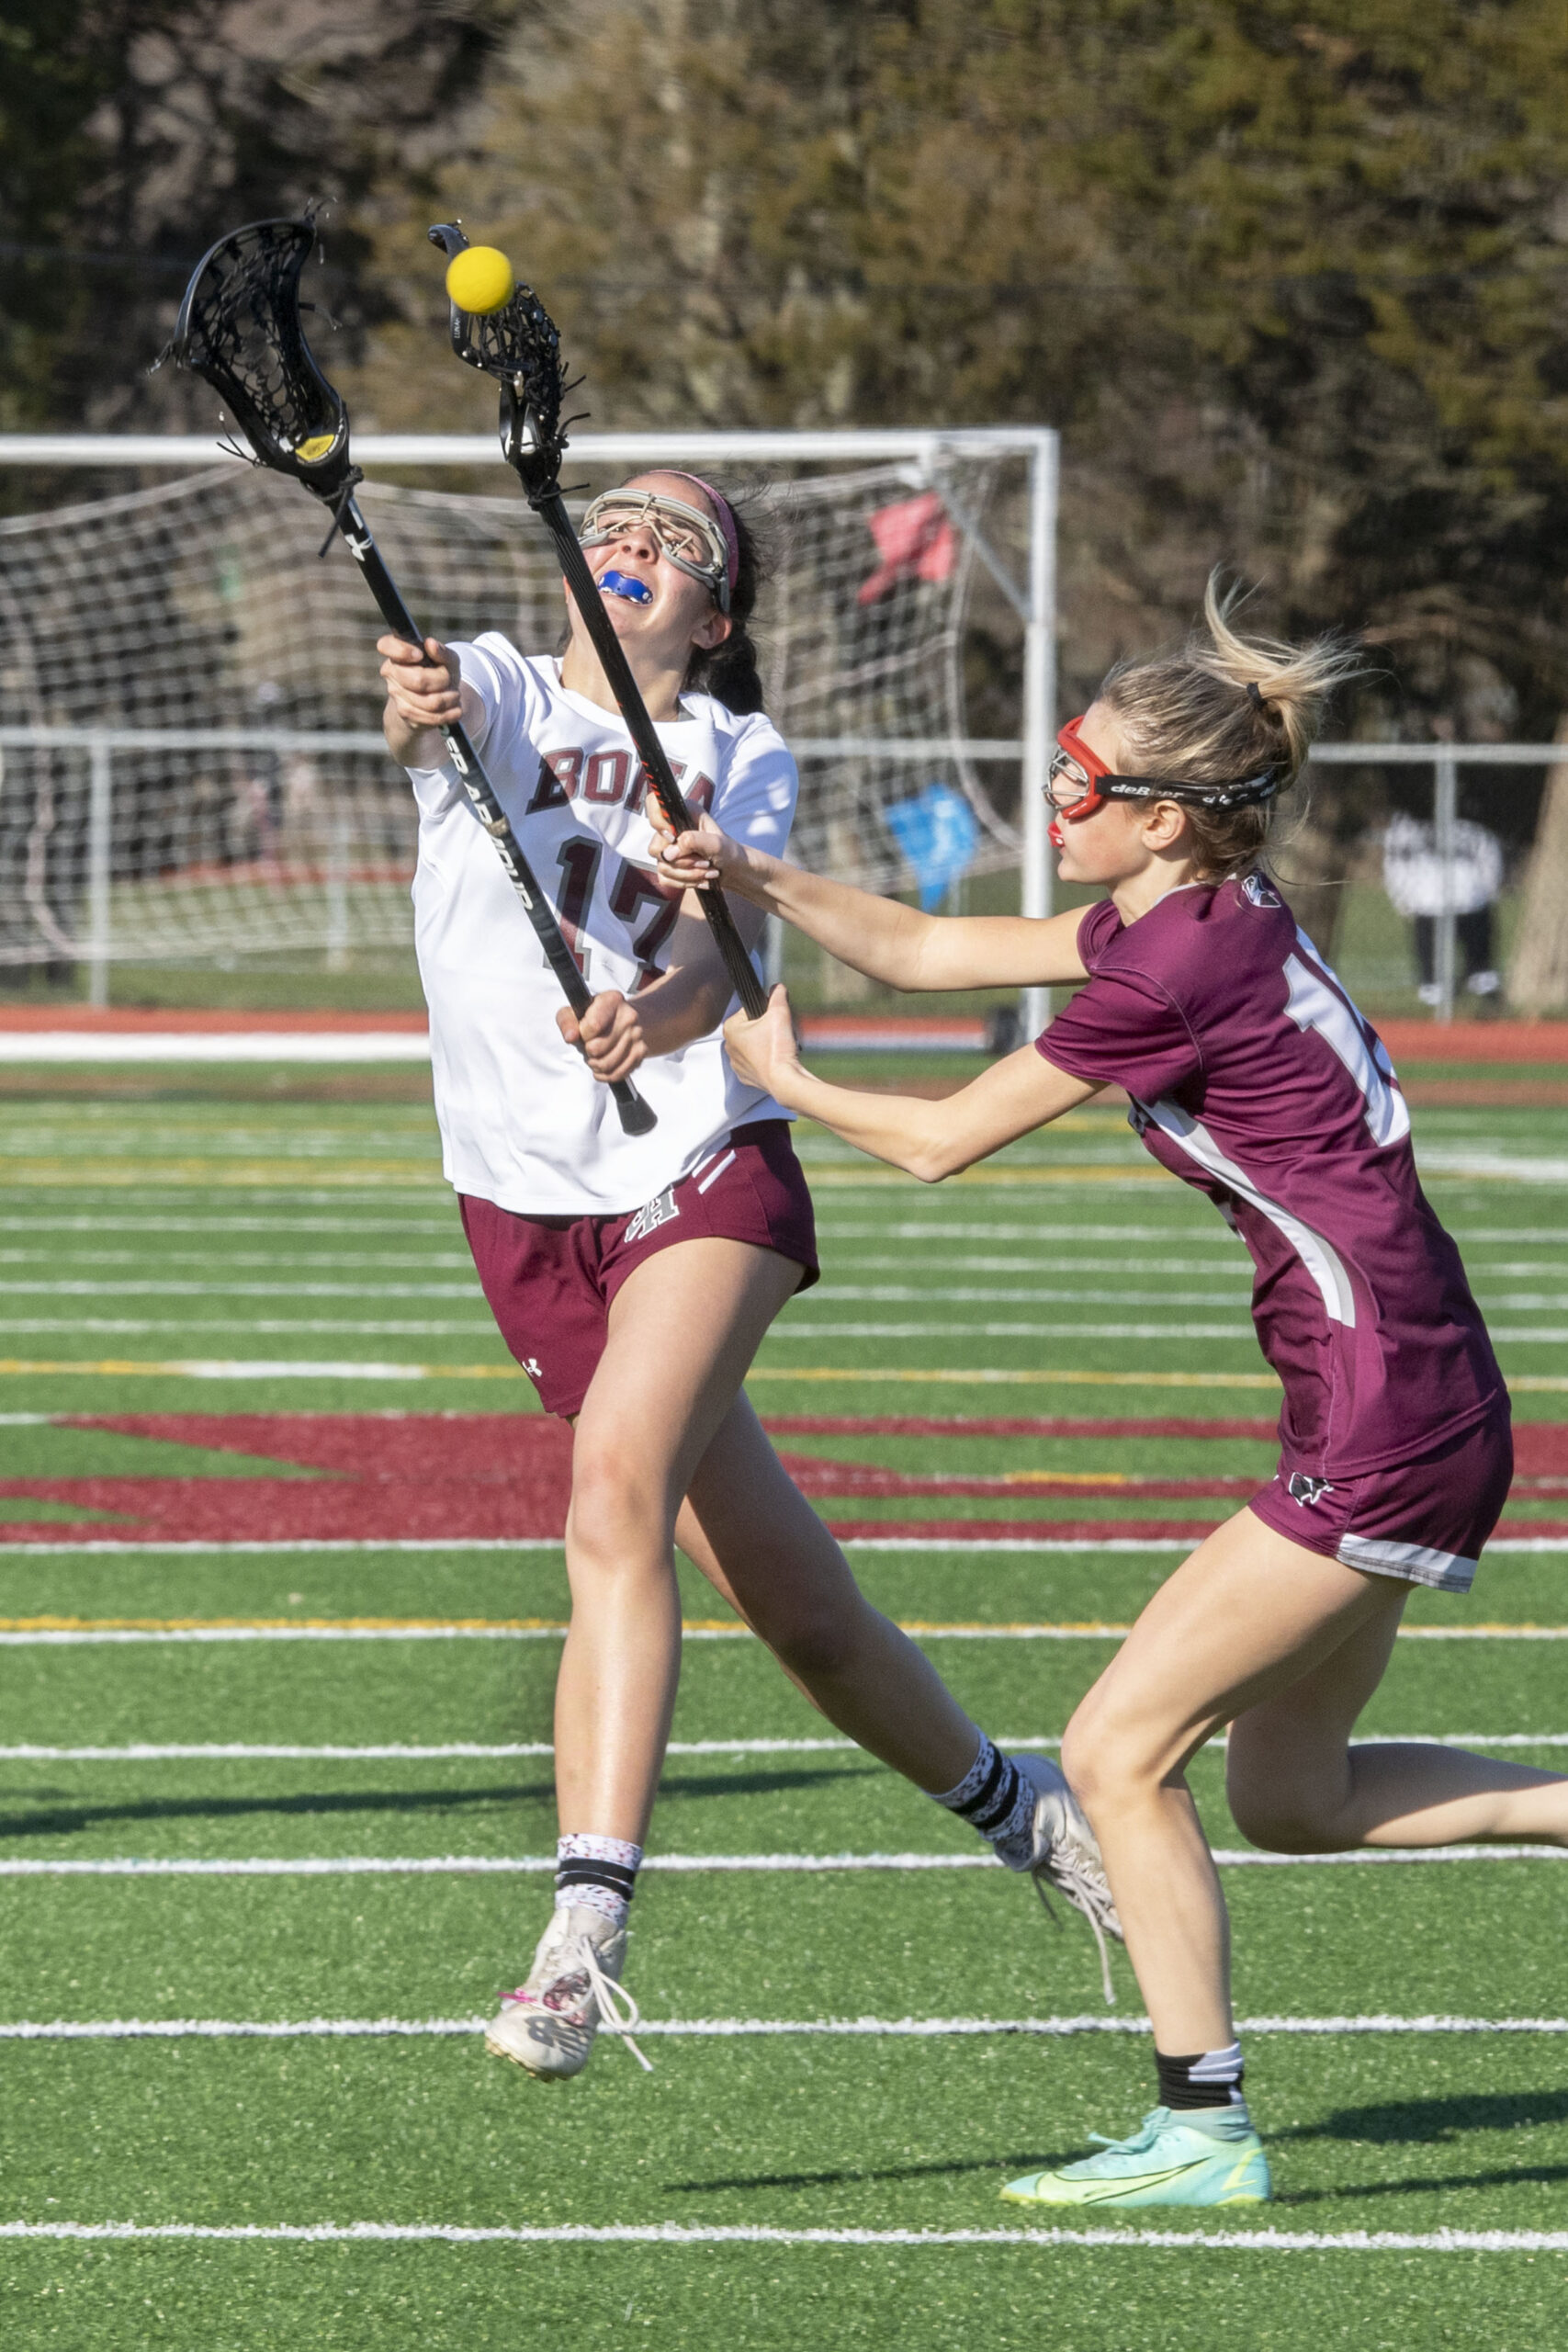 East Hampton's Melina Sarlo fights for the ball. The sophomore scored three goals in Bonac's 12-11 victory over Deer Park on Friday.  MICHAEL HELLER